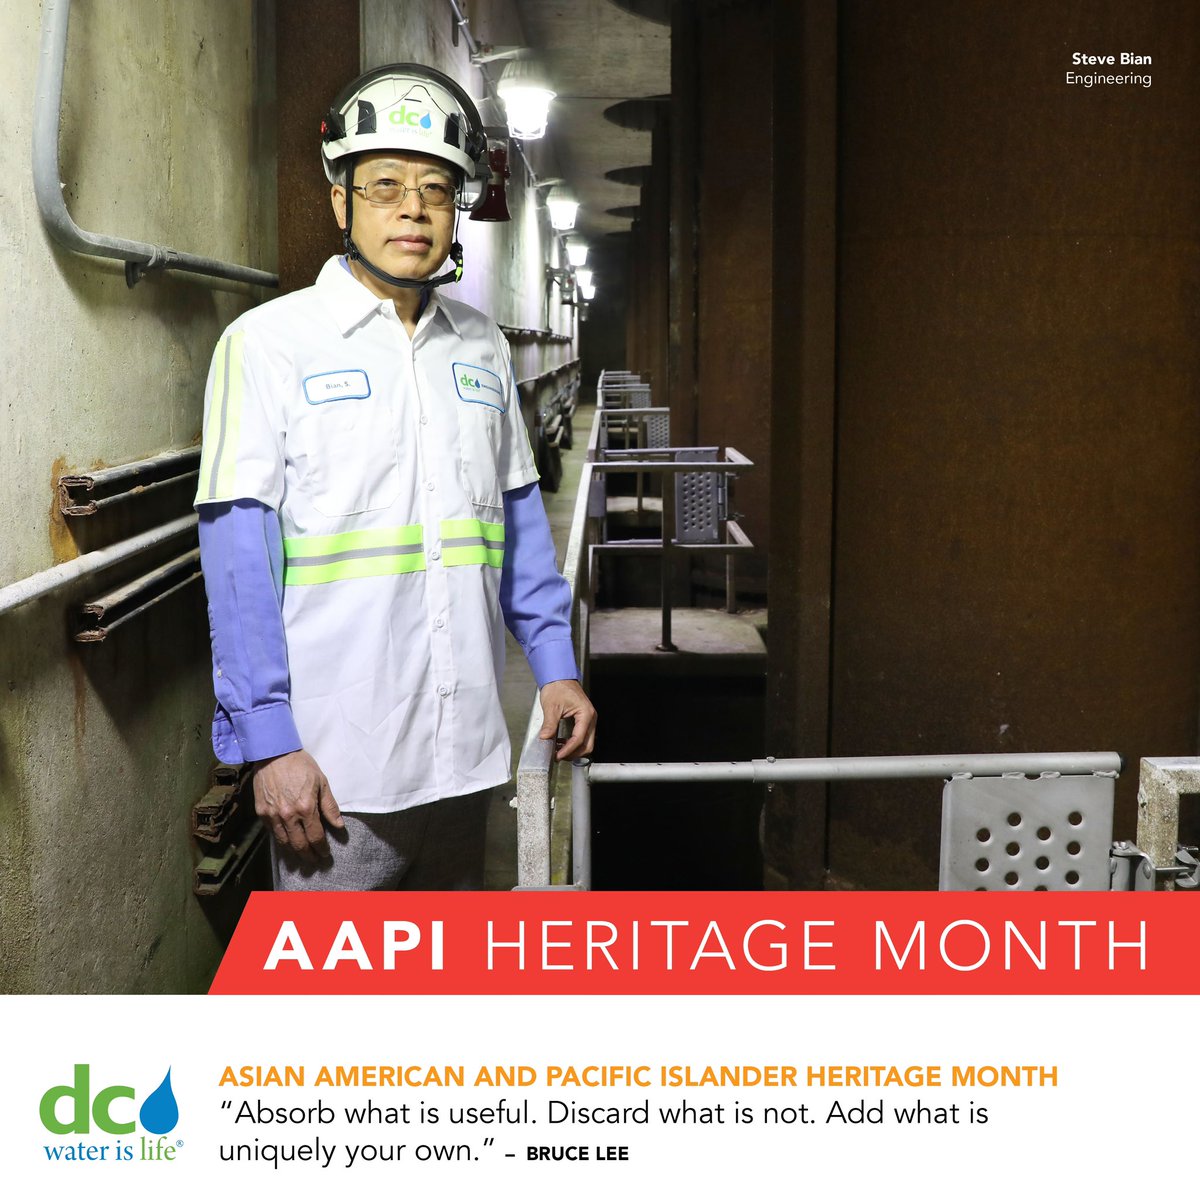 This month we are celebrating Asian American and Pacific Islander history. Team Blue honors the contributions the AAPI community has made not only to serve the District but to water sustainability everywhere. 💧🌏